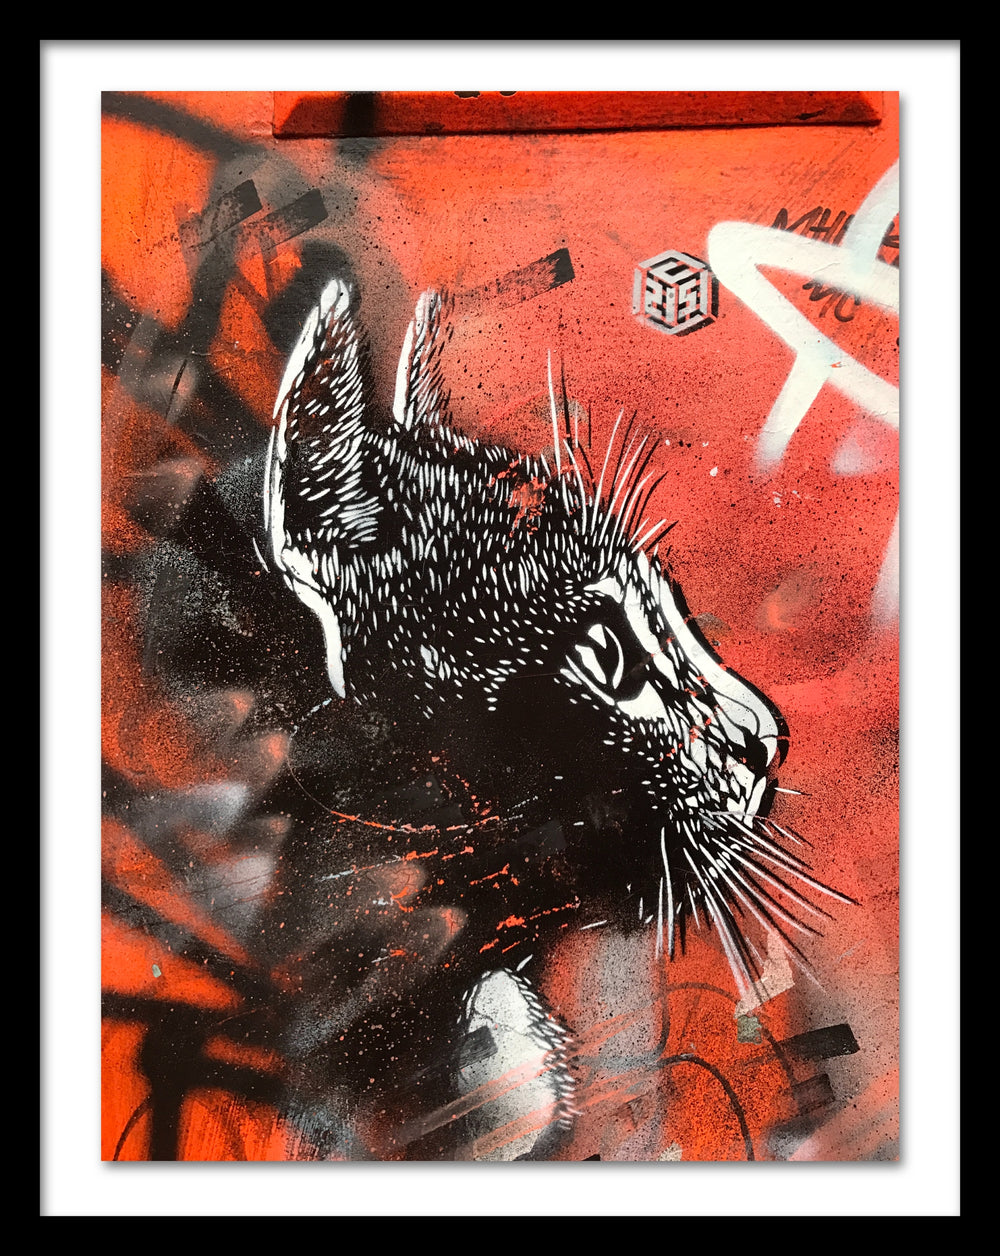 A poster that depicts a cat painted with stencils on a red background